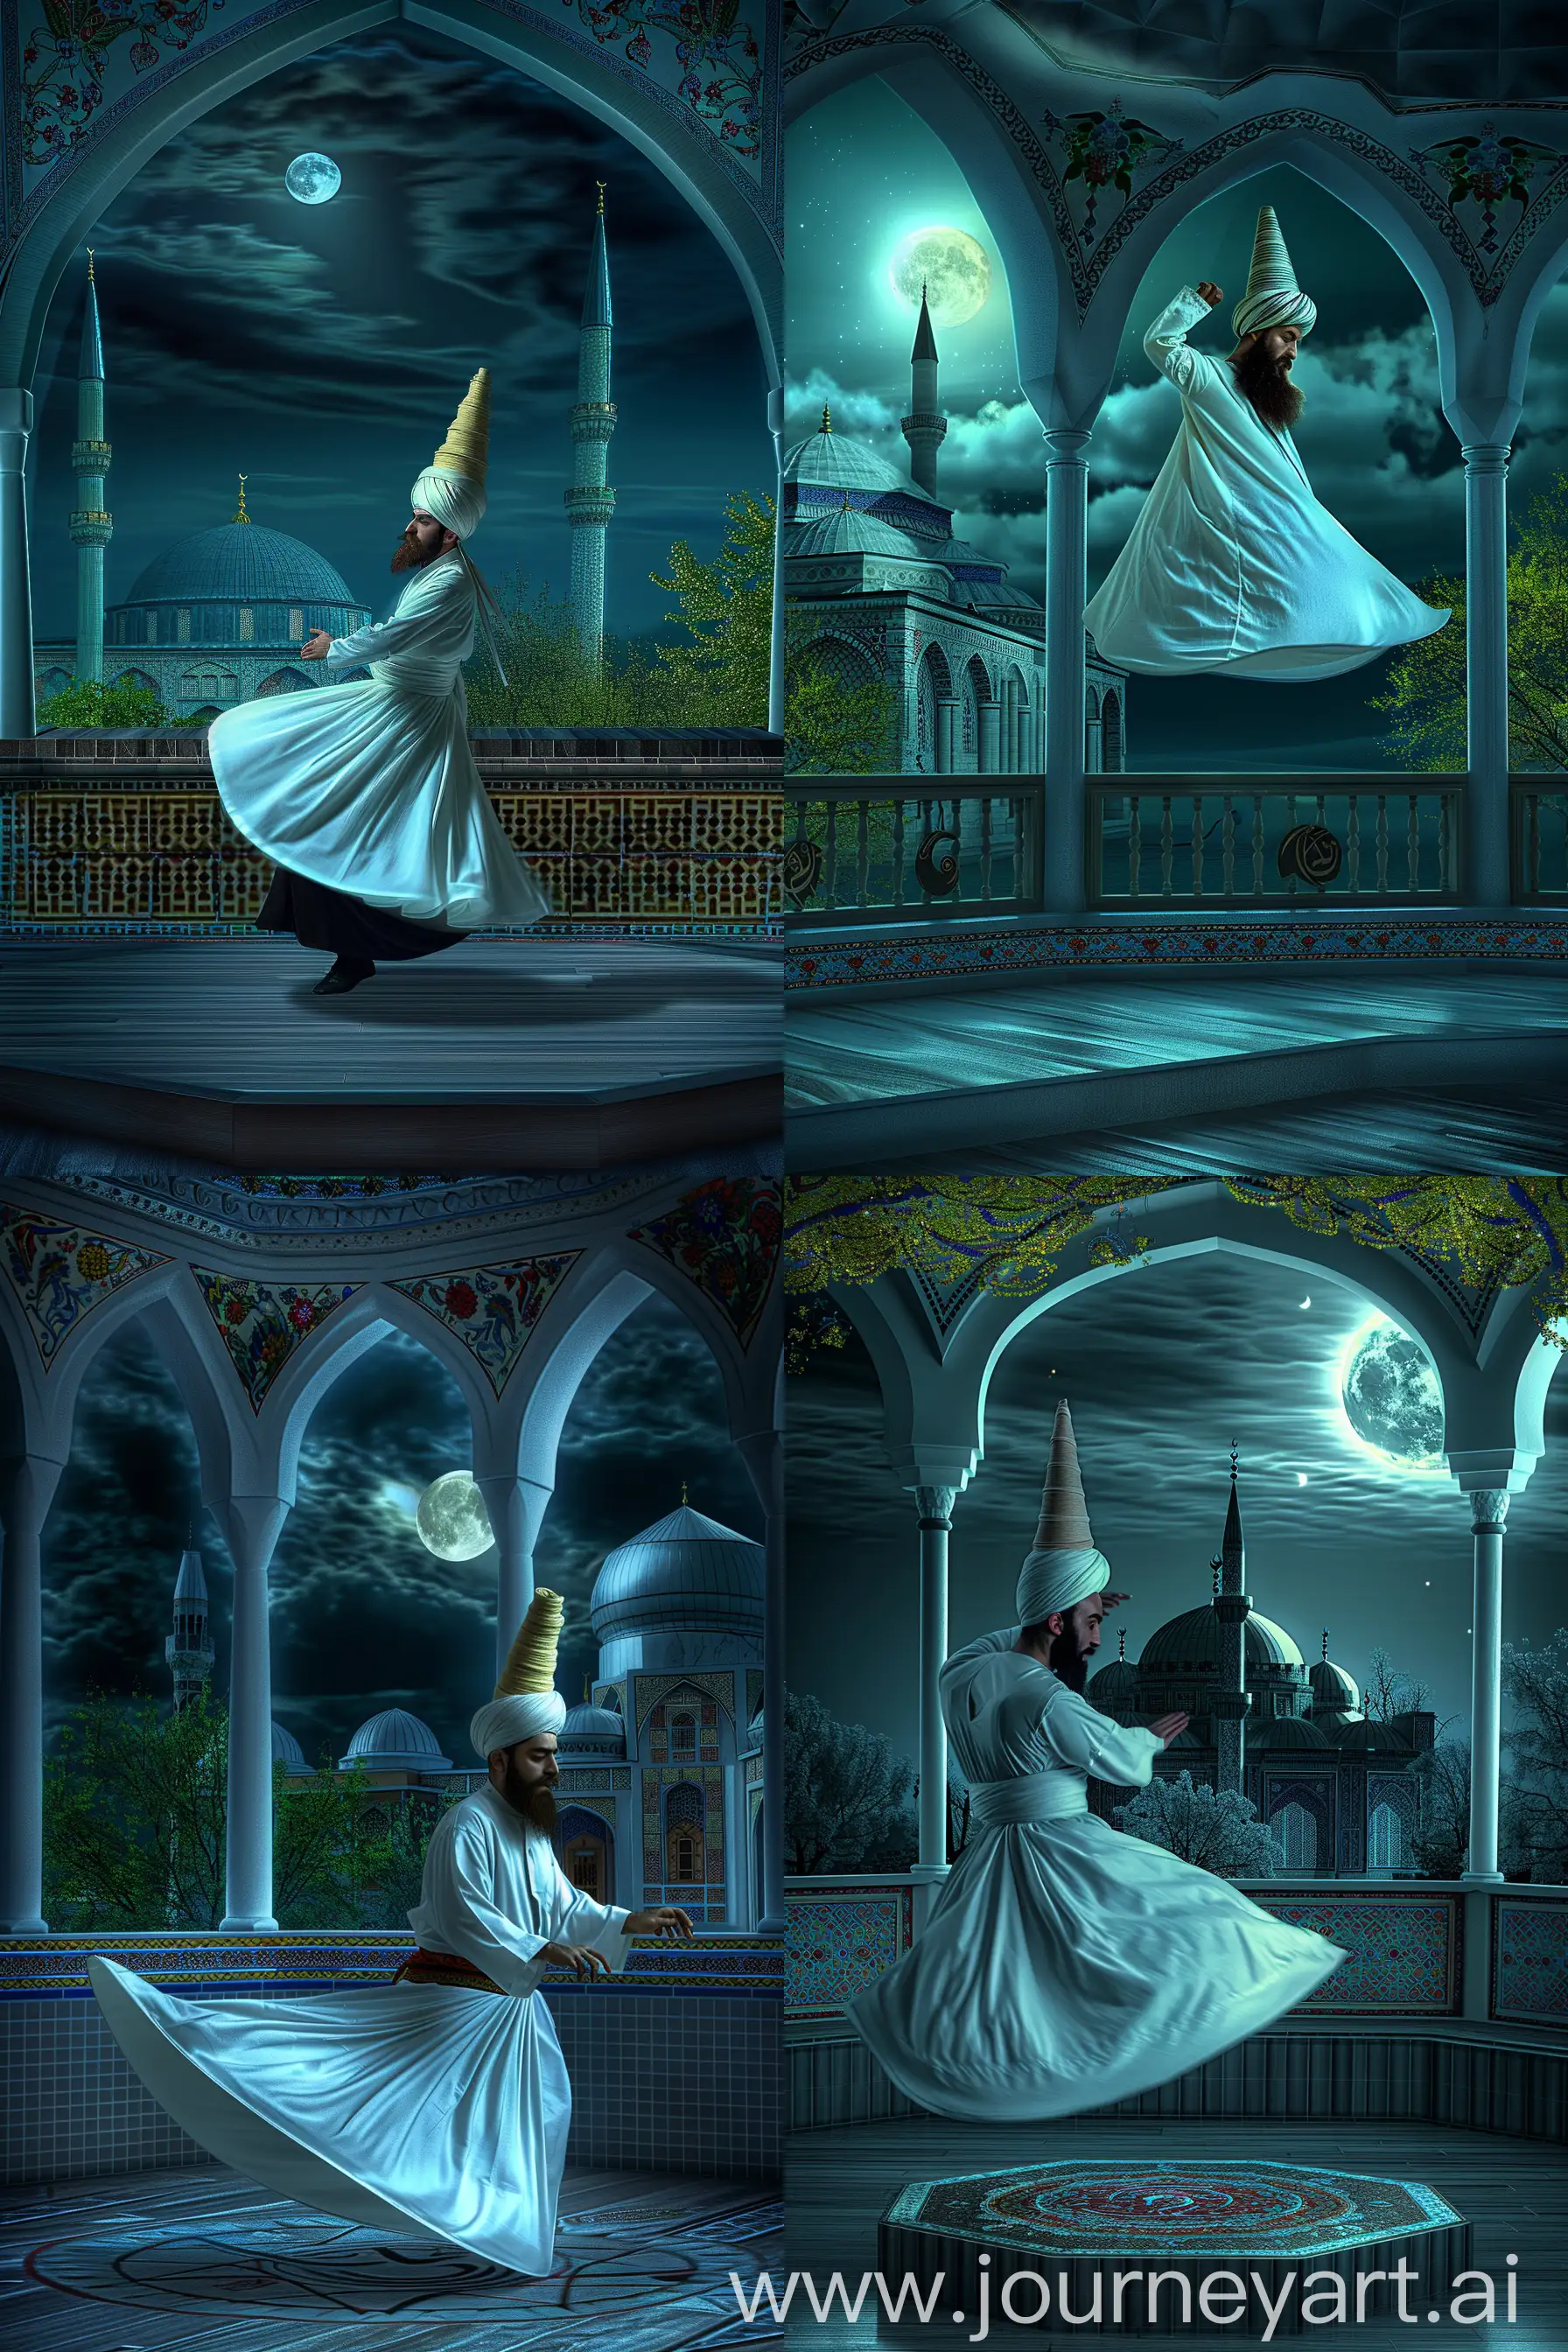 Blonde-Bearded-Whirling-Dervish-Performing-Sema-in-Persian-Mosque-at-Night